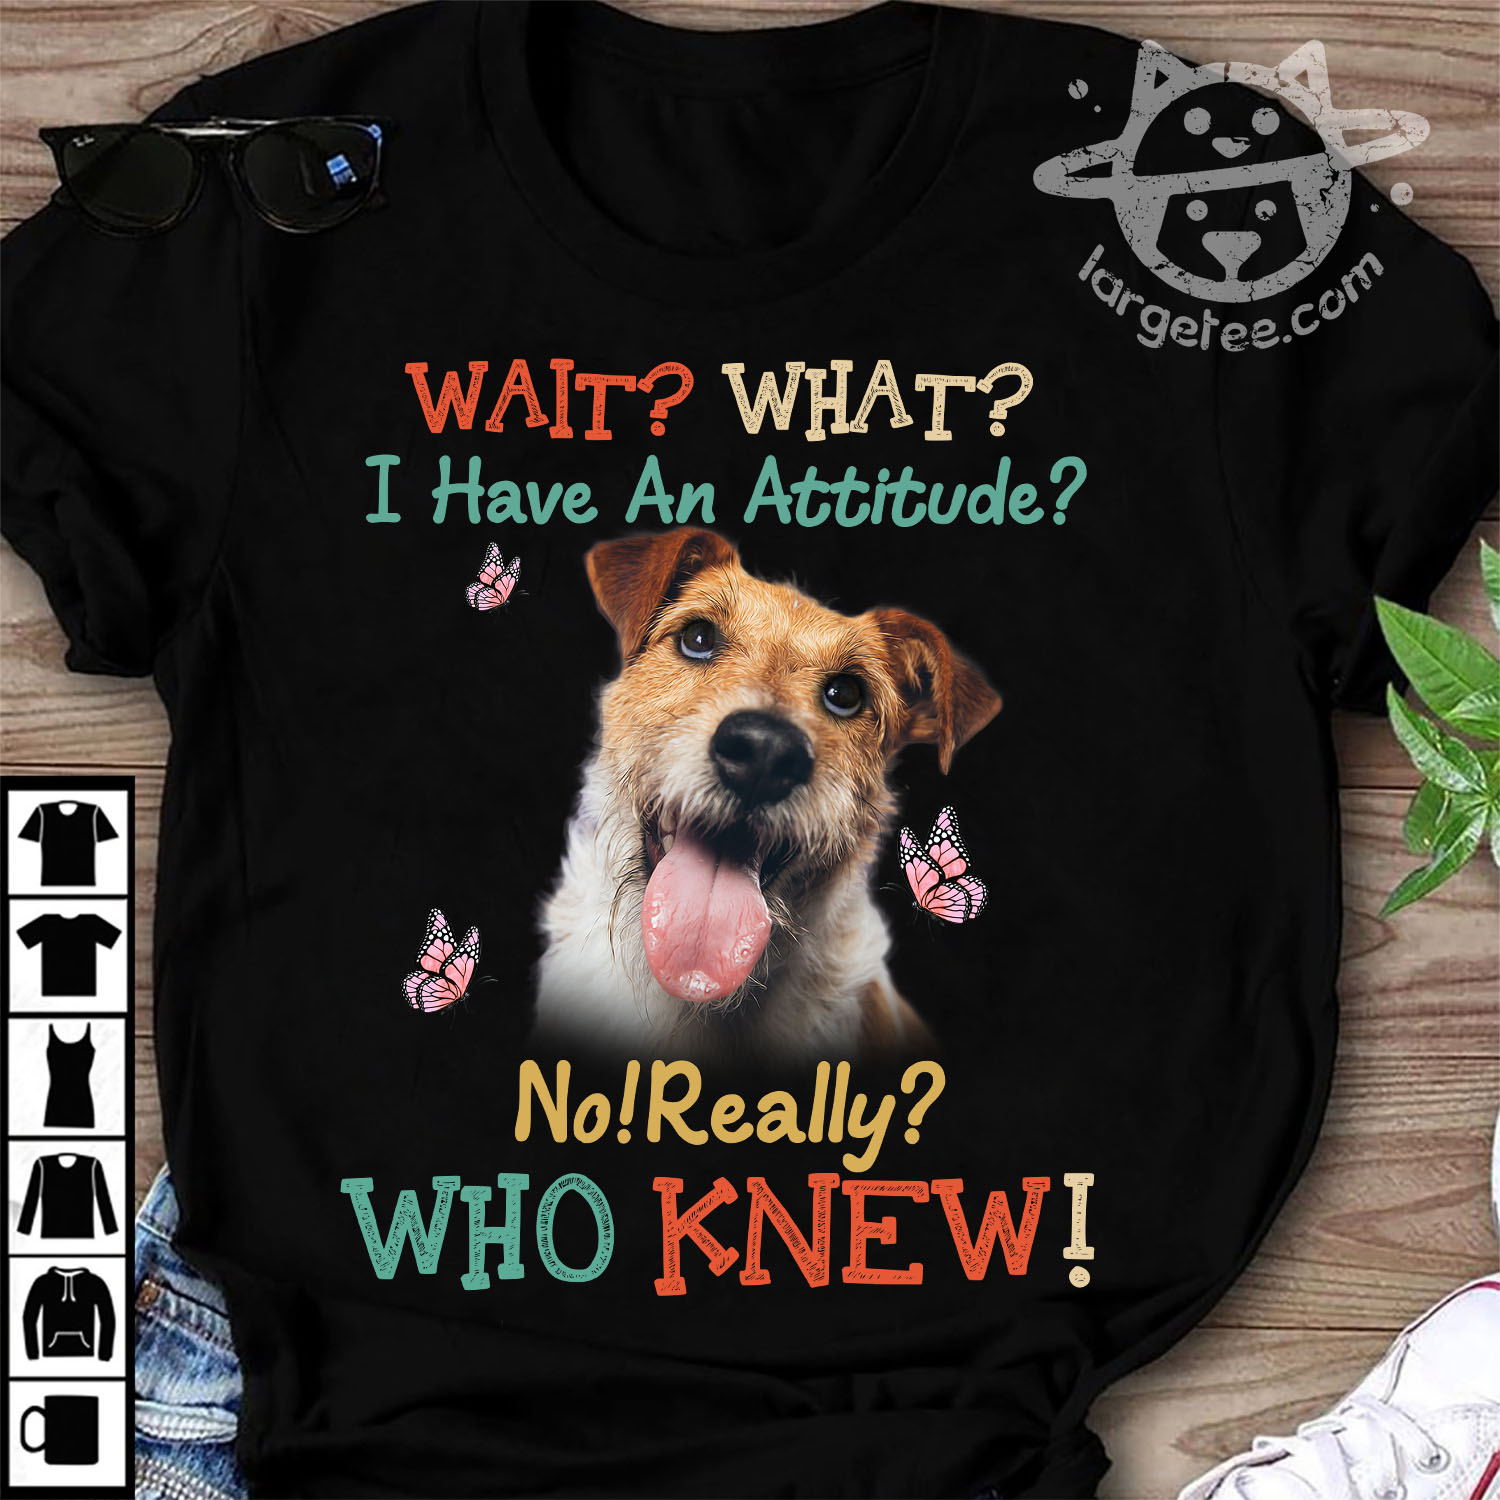 I have an attitude - A mutt dog, dog lover